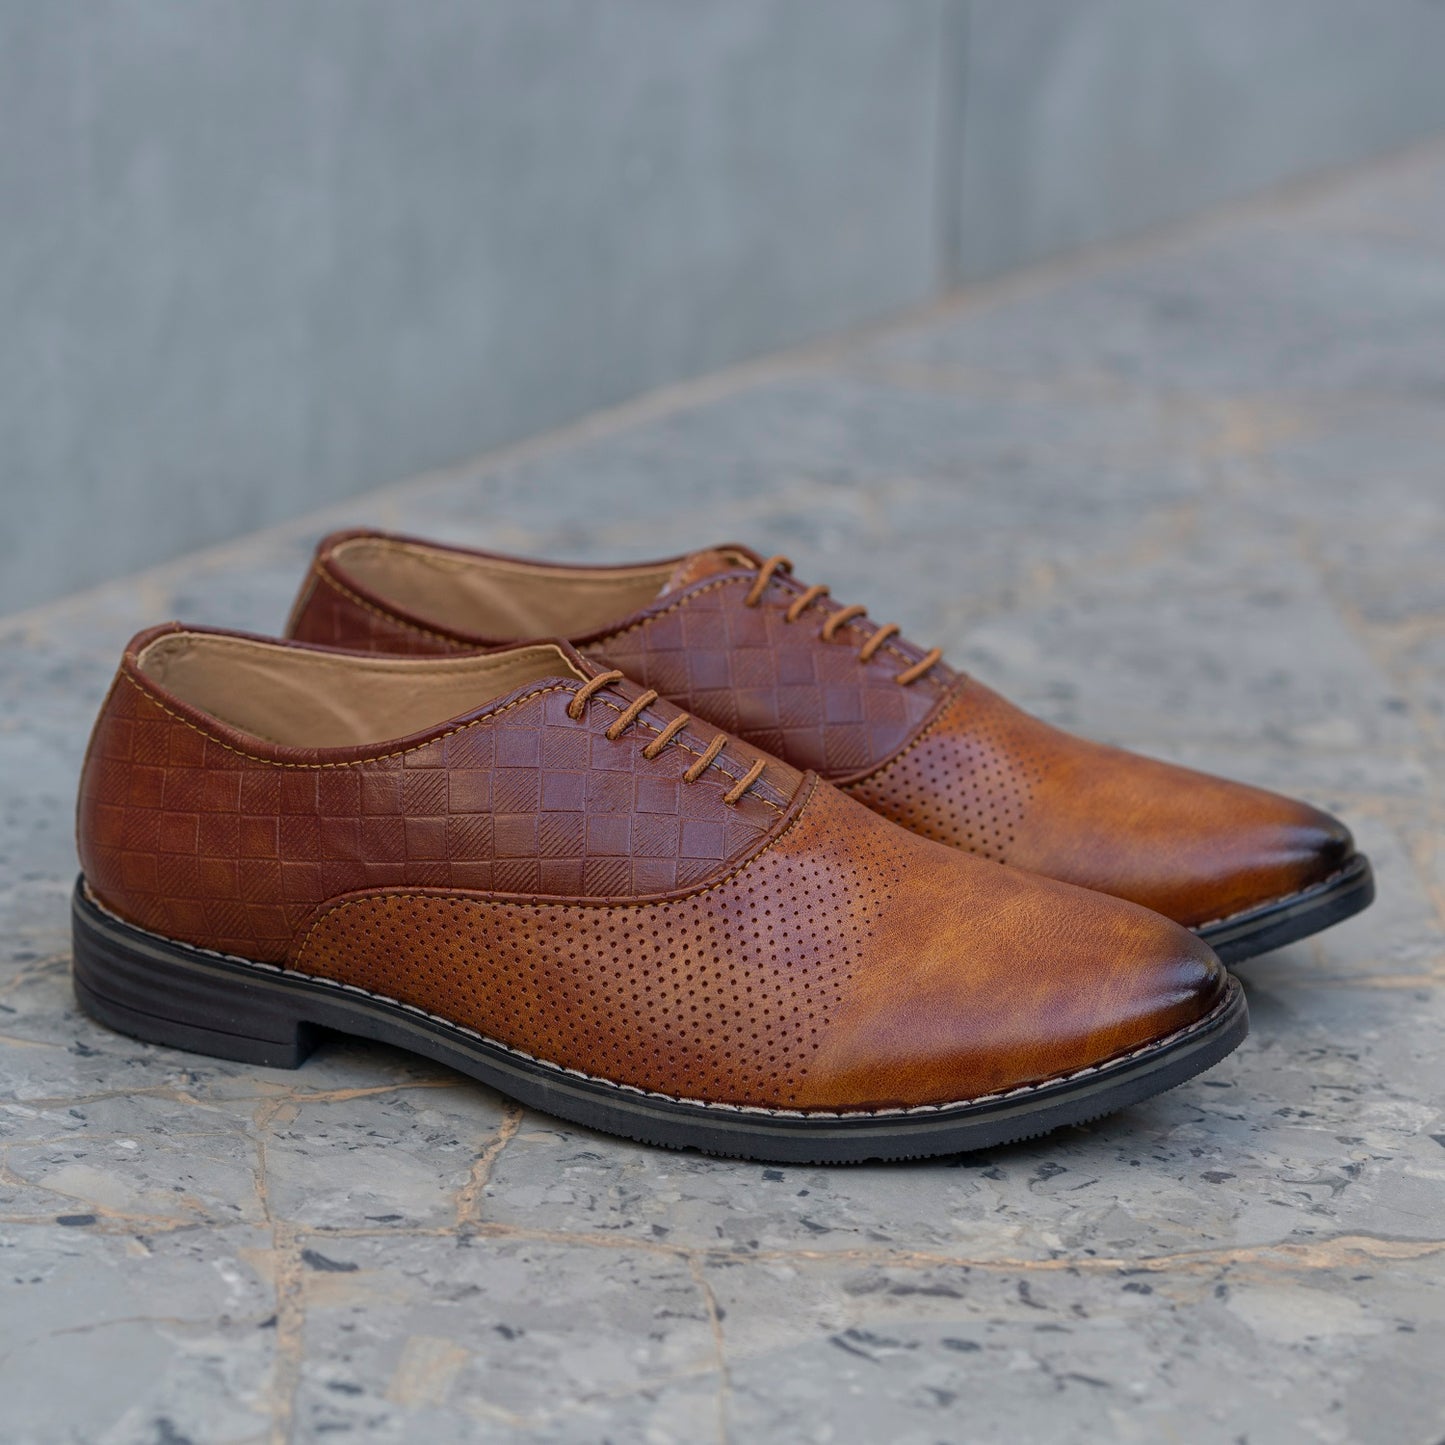 The Aurous Athens Oxford Formal Laceup Derby Shoes With Dotted Texture